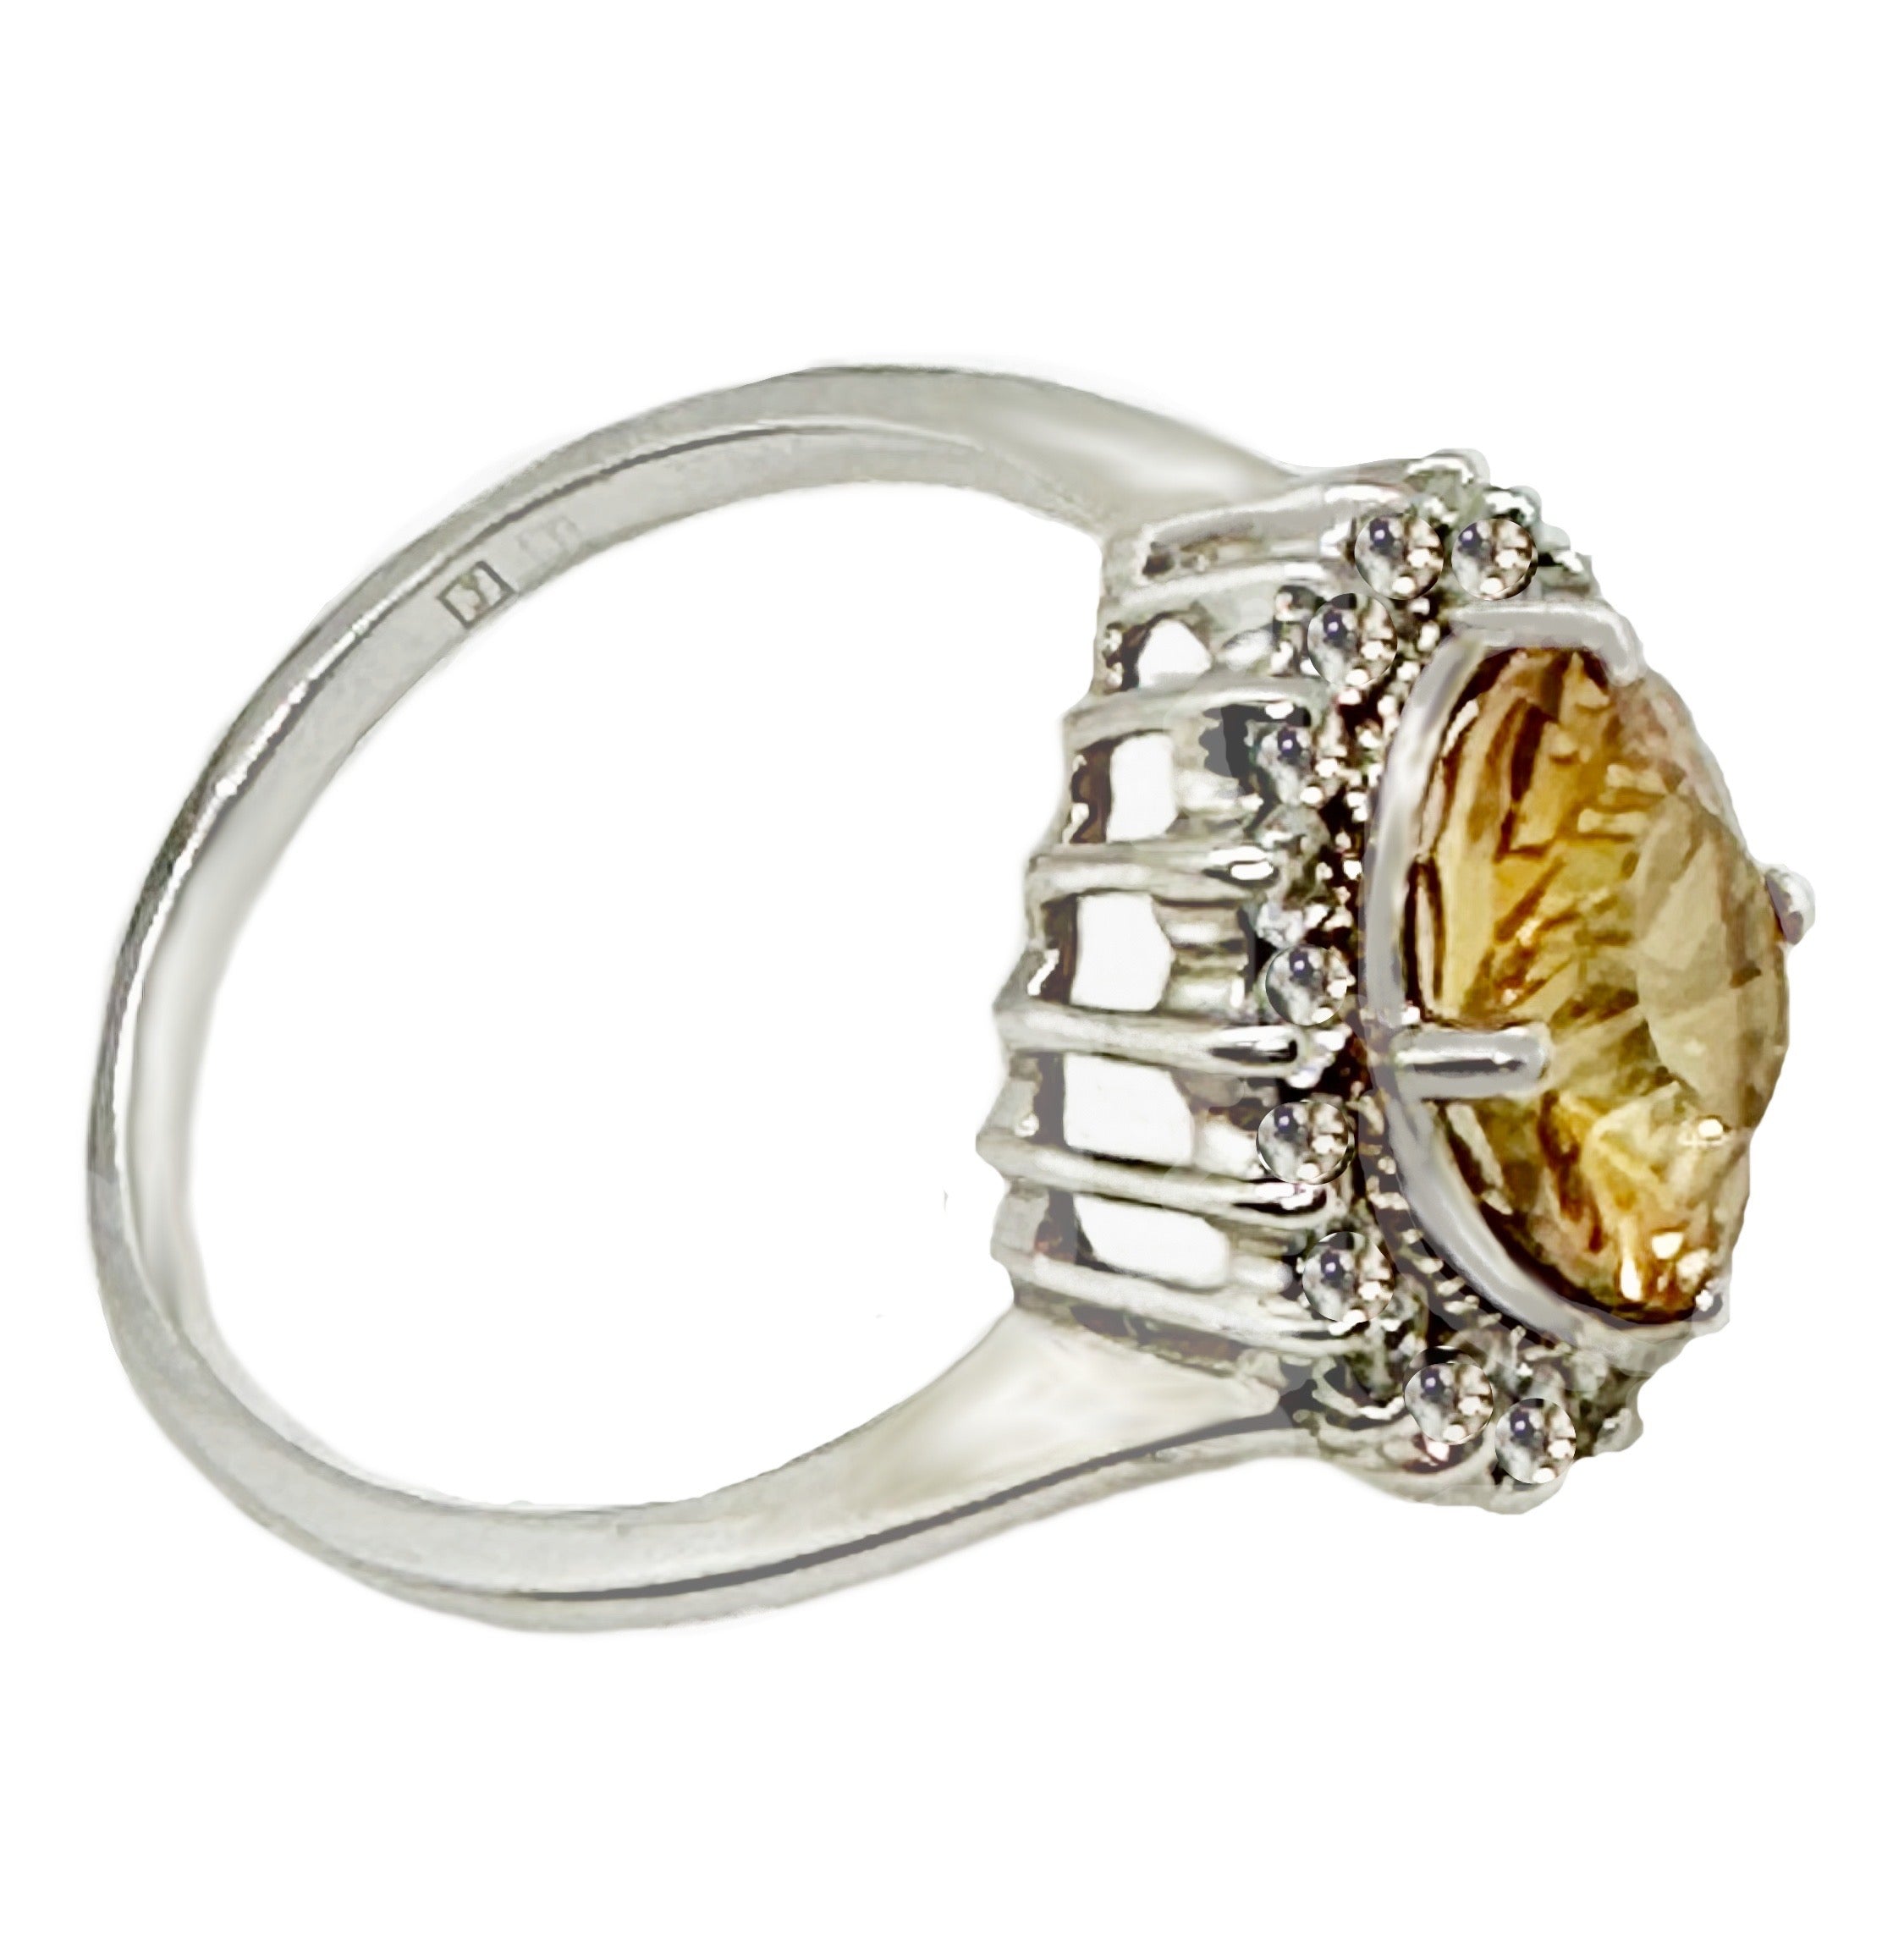 Natural Citrine, AAA White Cubic Zirconia Solid .925 Silver,14K White Gold Ring Size 9 or R1/2 - BELLADONNA